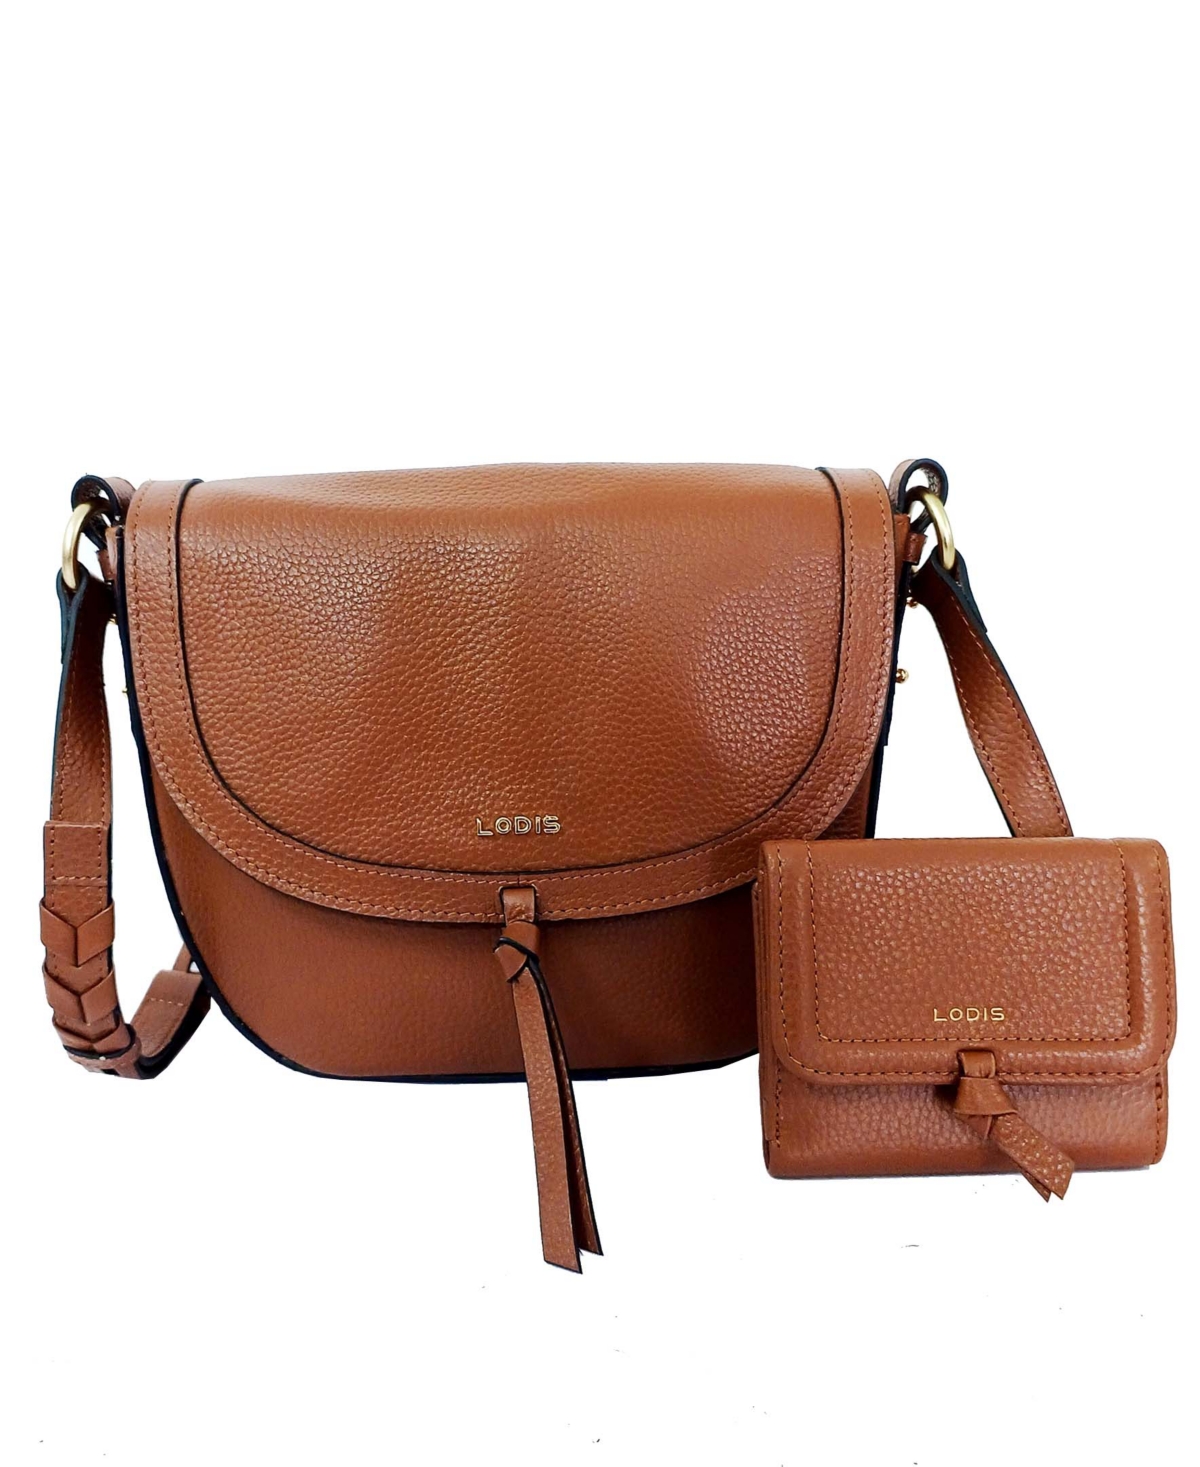 Women's Ellia Leather Crossbody Bag with Matching Wallet Set, 2 Pieces - Chestnut